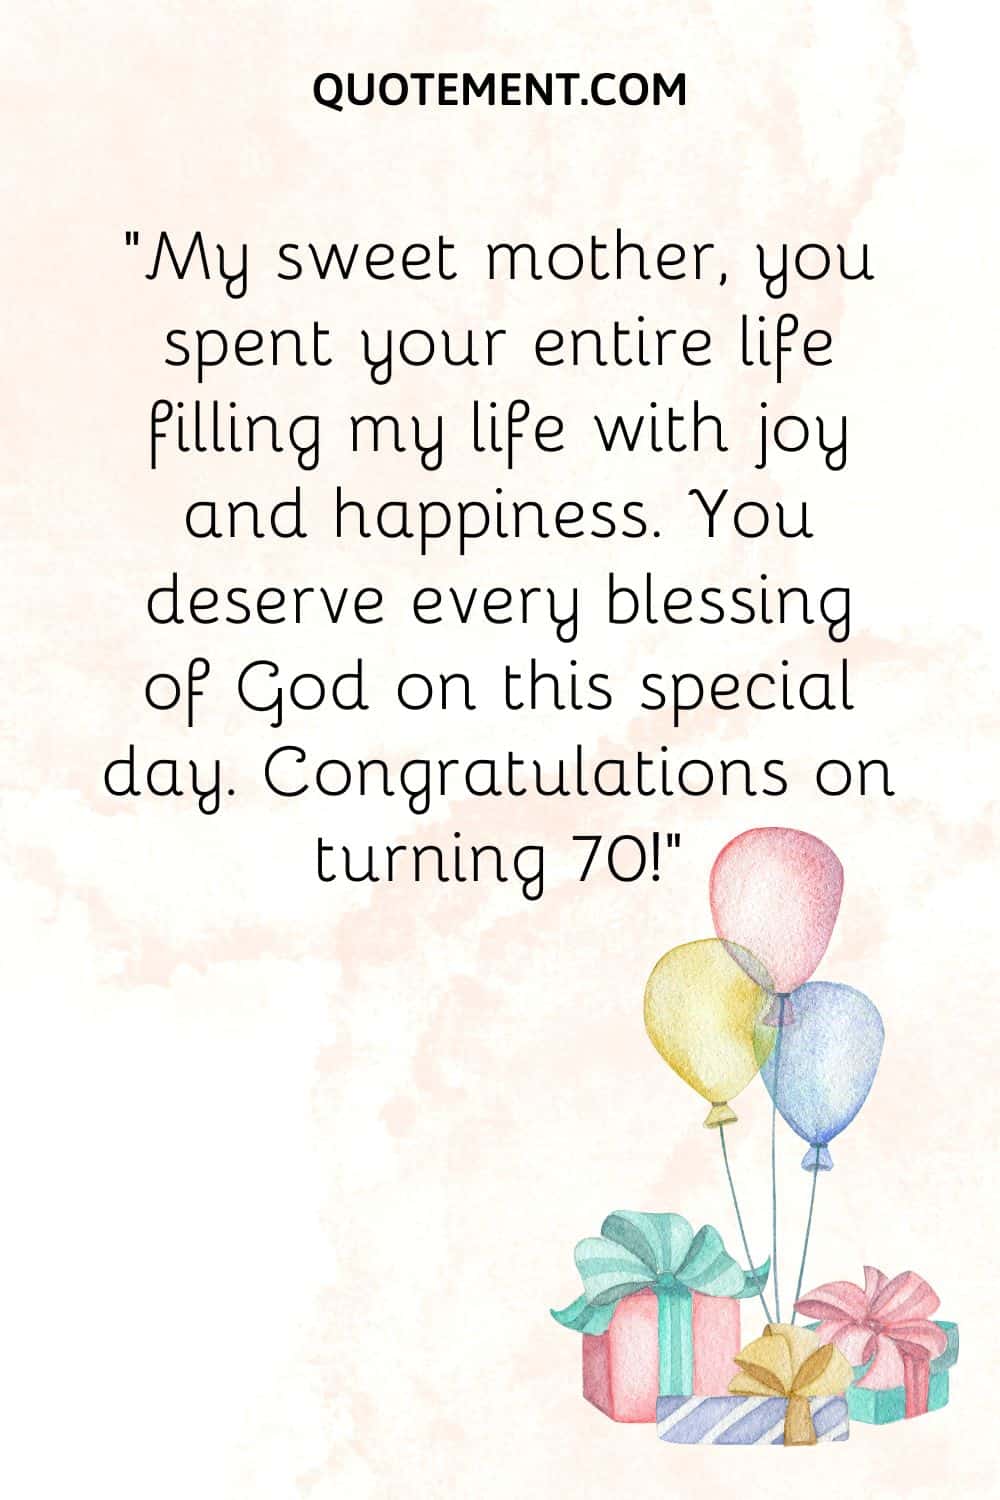 90 Happy 70th Birthday Wishes For Your Dear 70-Year-Old